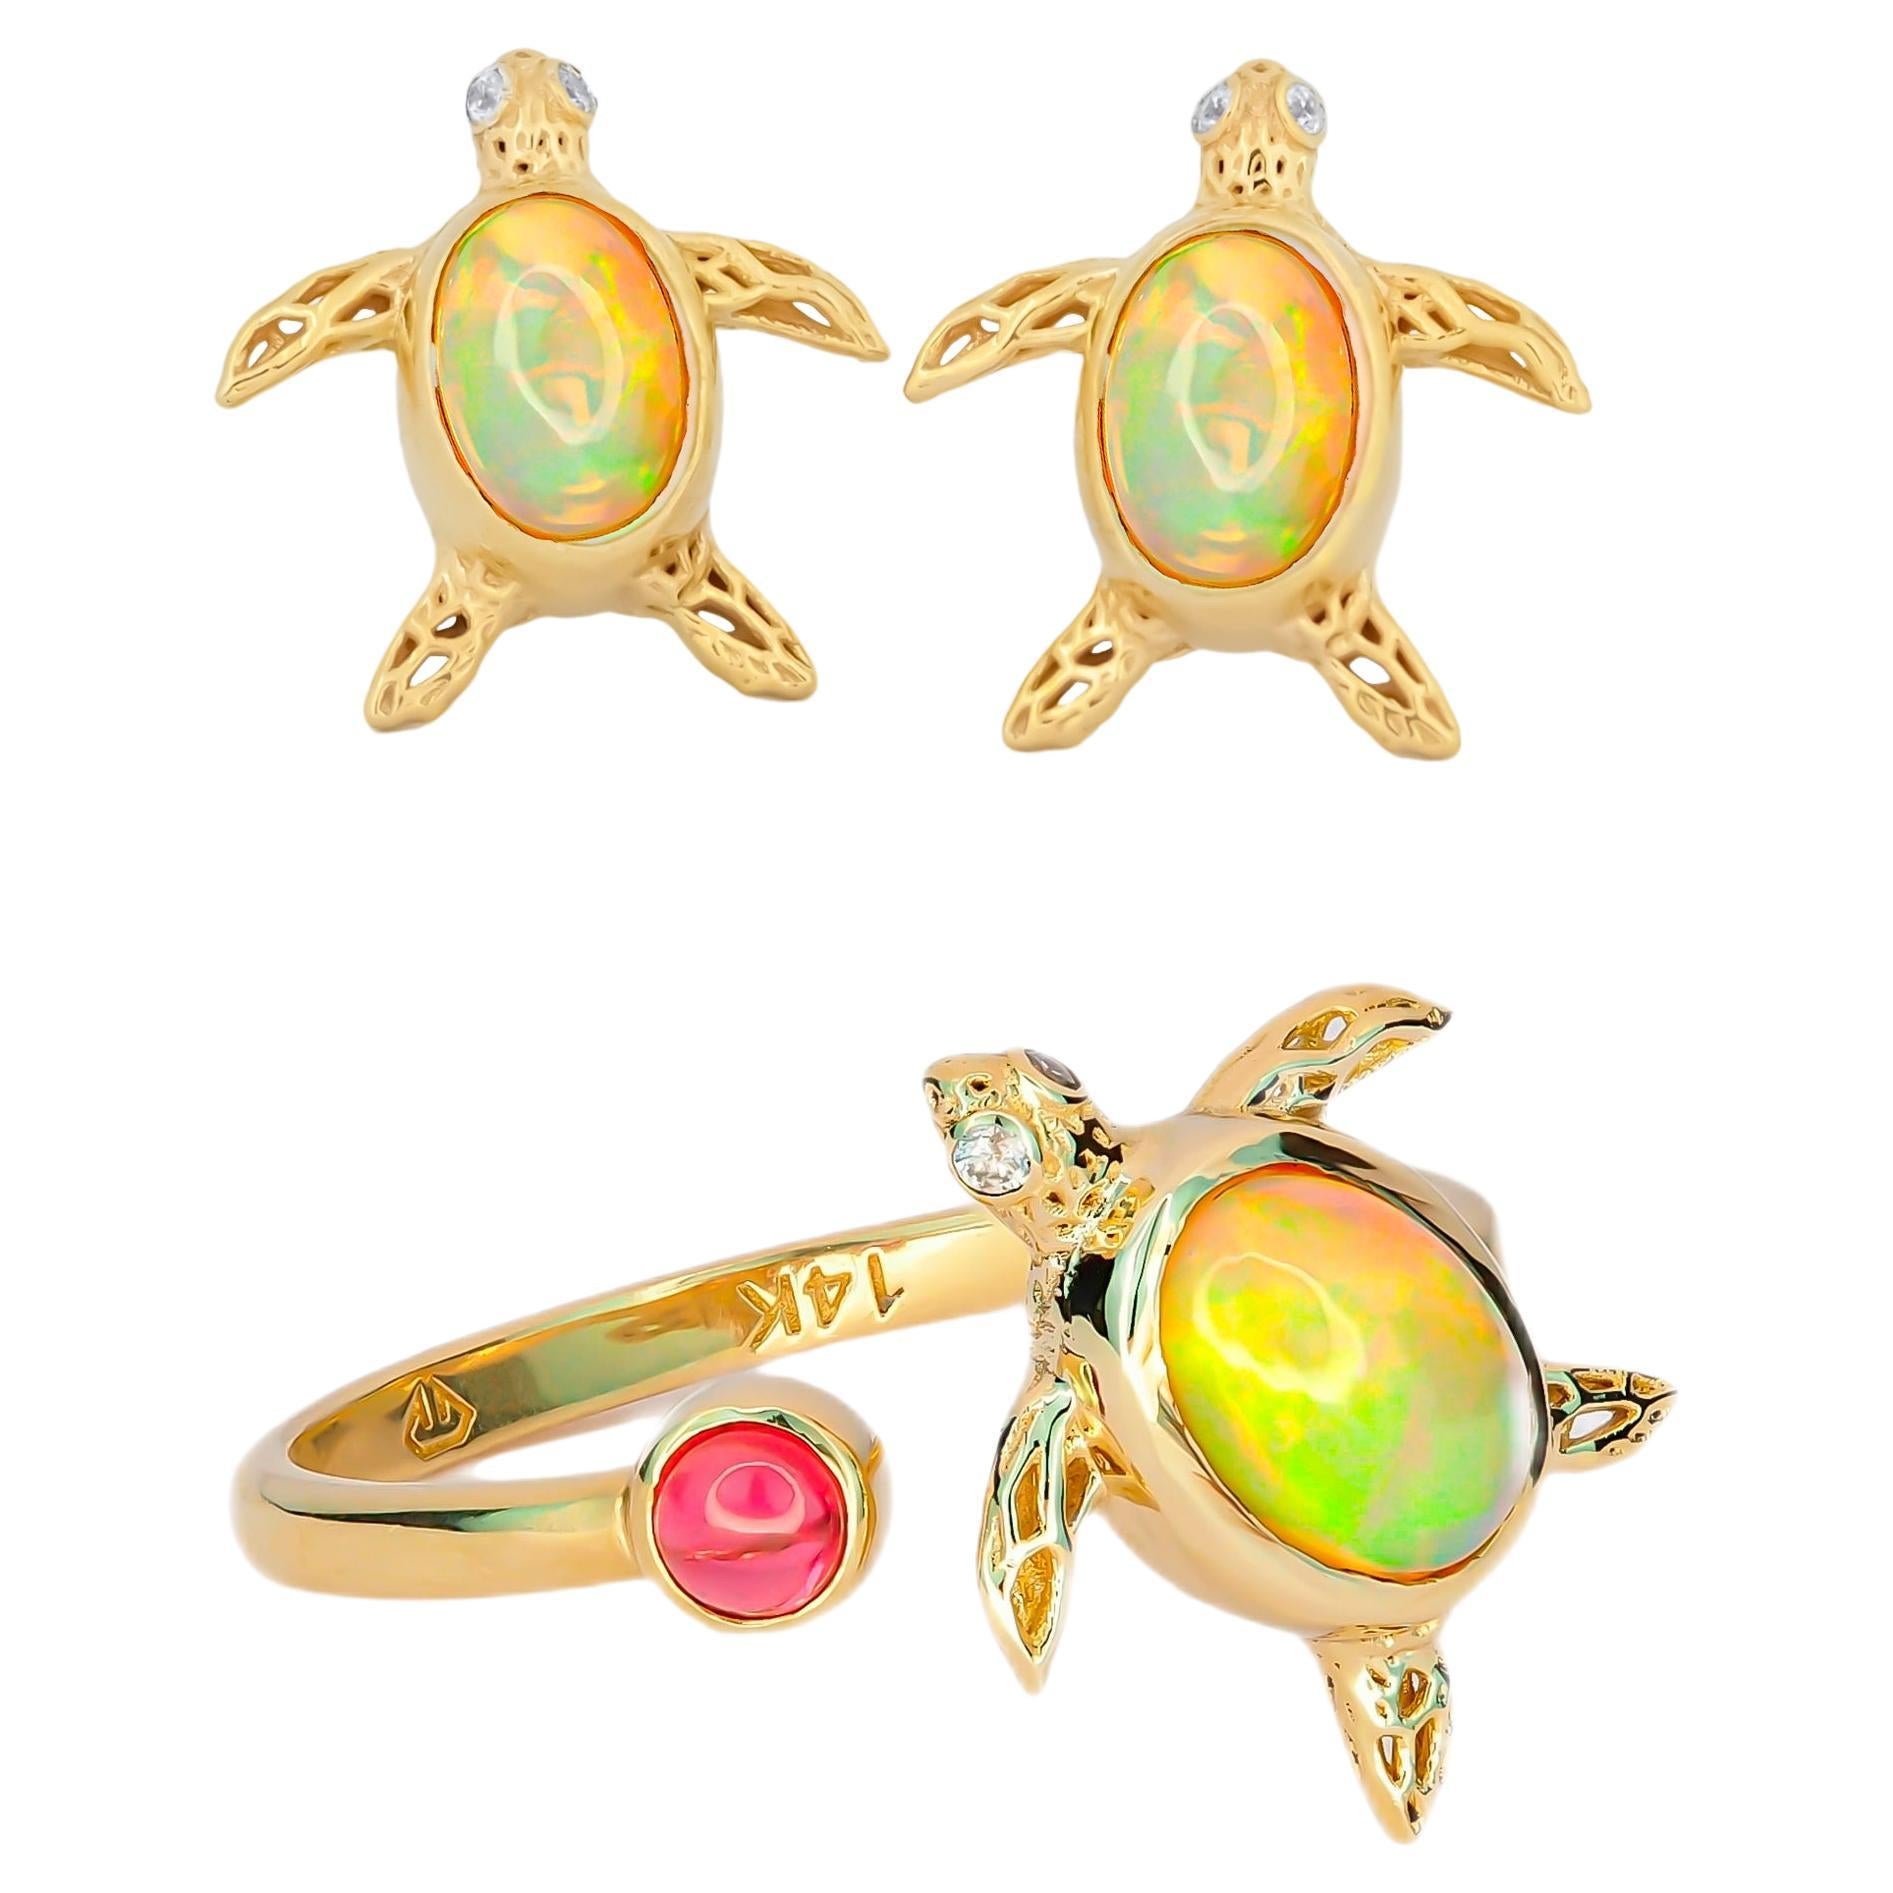 Turtle set: earrings studs and ring with opals in 14k gold. For Sale